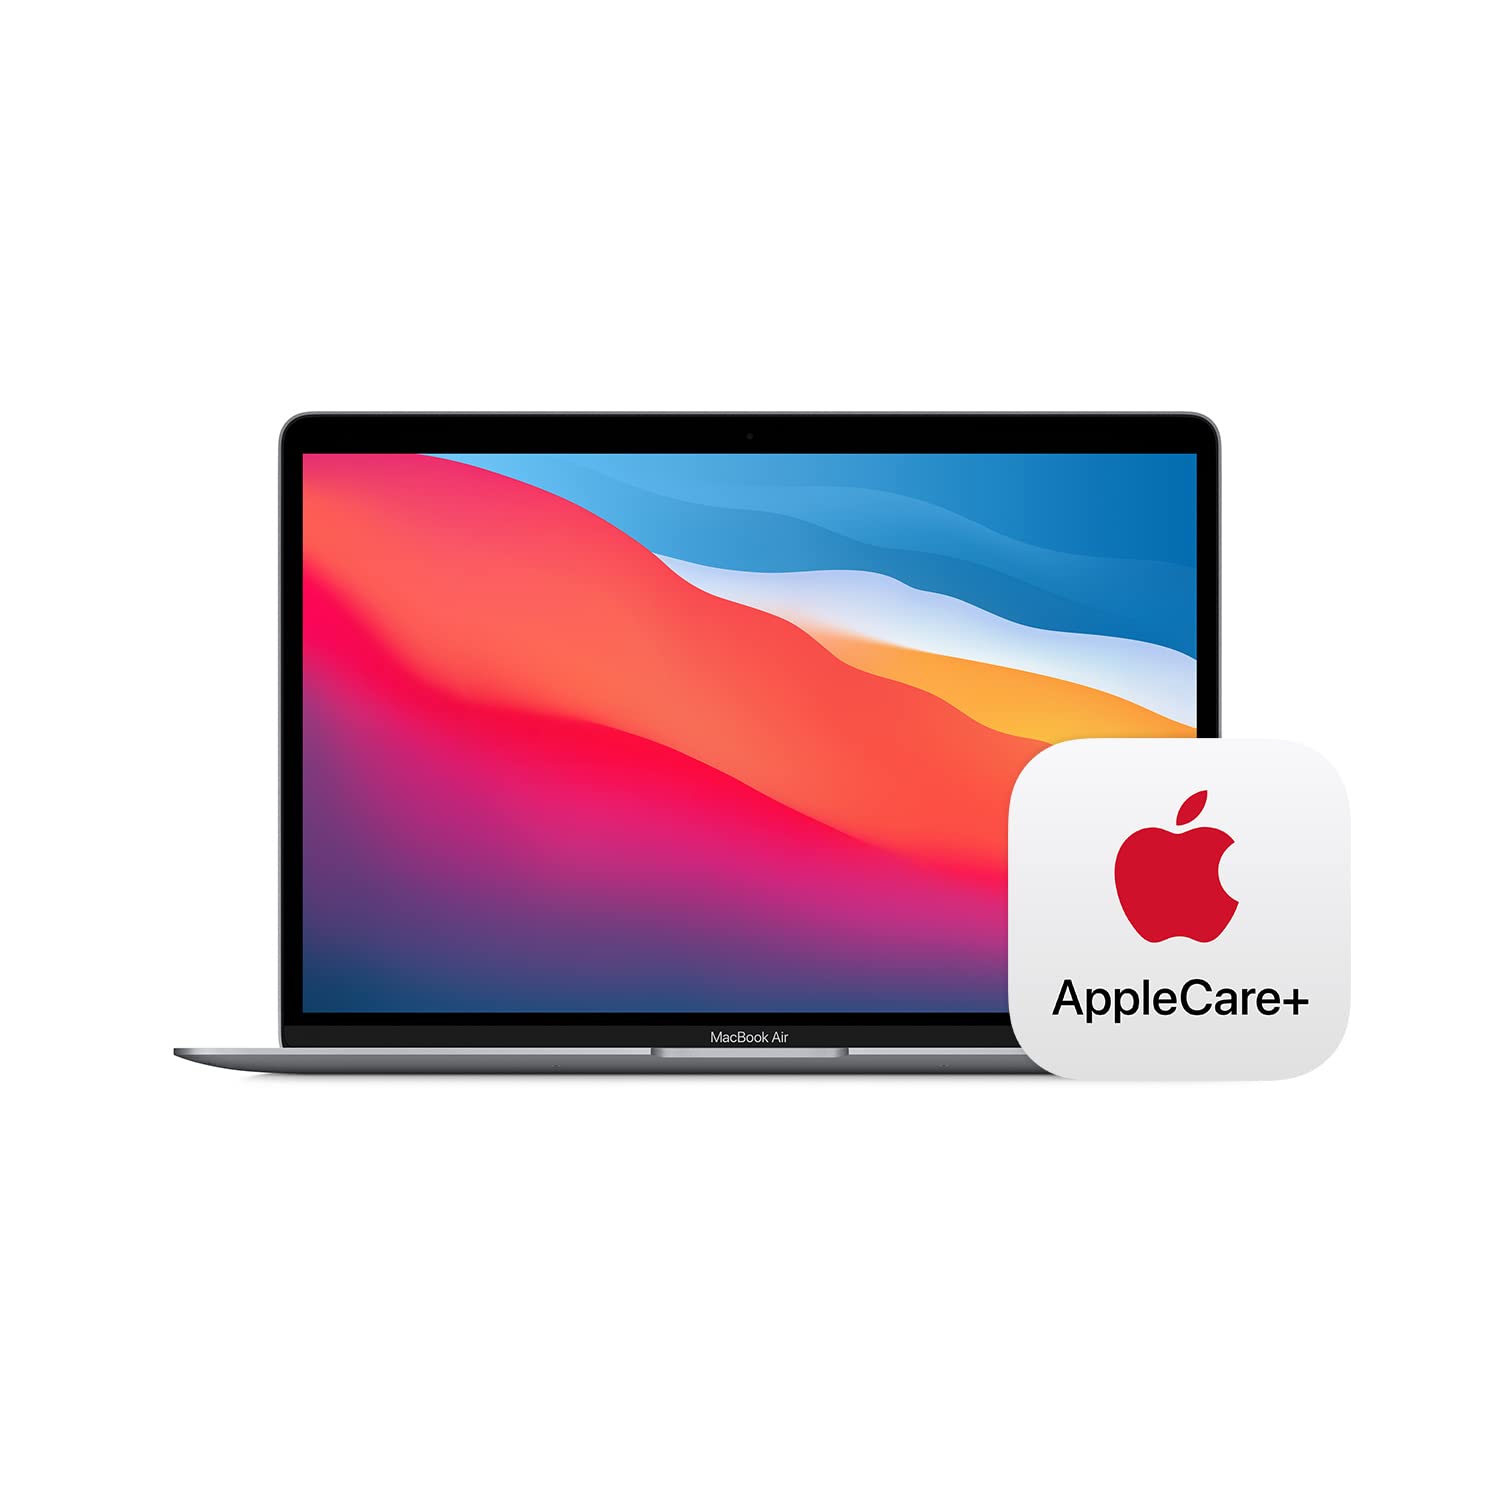 2020 Apple MacBook Air Laptop: Apple M1 Chip, 13” Retina Display, 8GB RAM, 256GB SSD Storage, Backlit Keyboard, FaceTime HD Camera, Touch ID. Works with iPhone/iPad; Space Gray with AppleCare+ (3 Years)